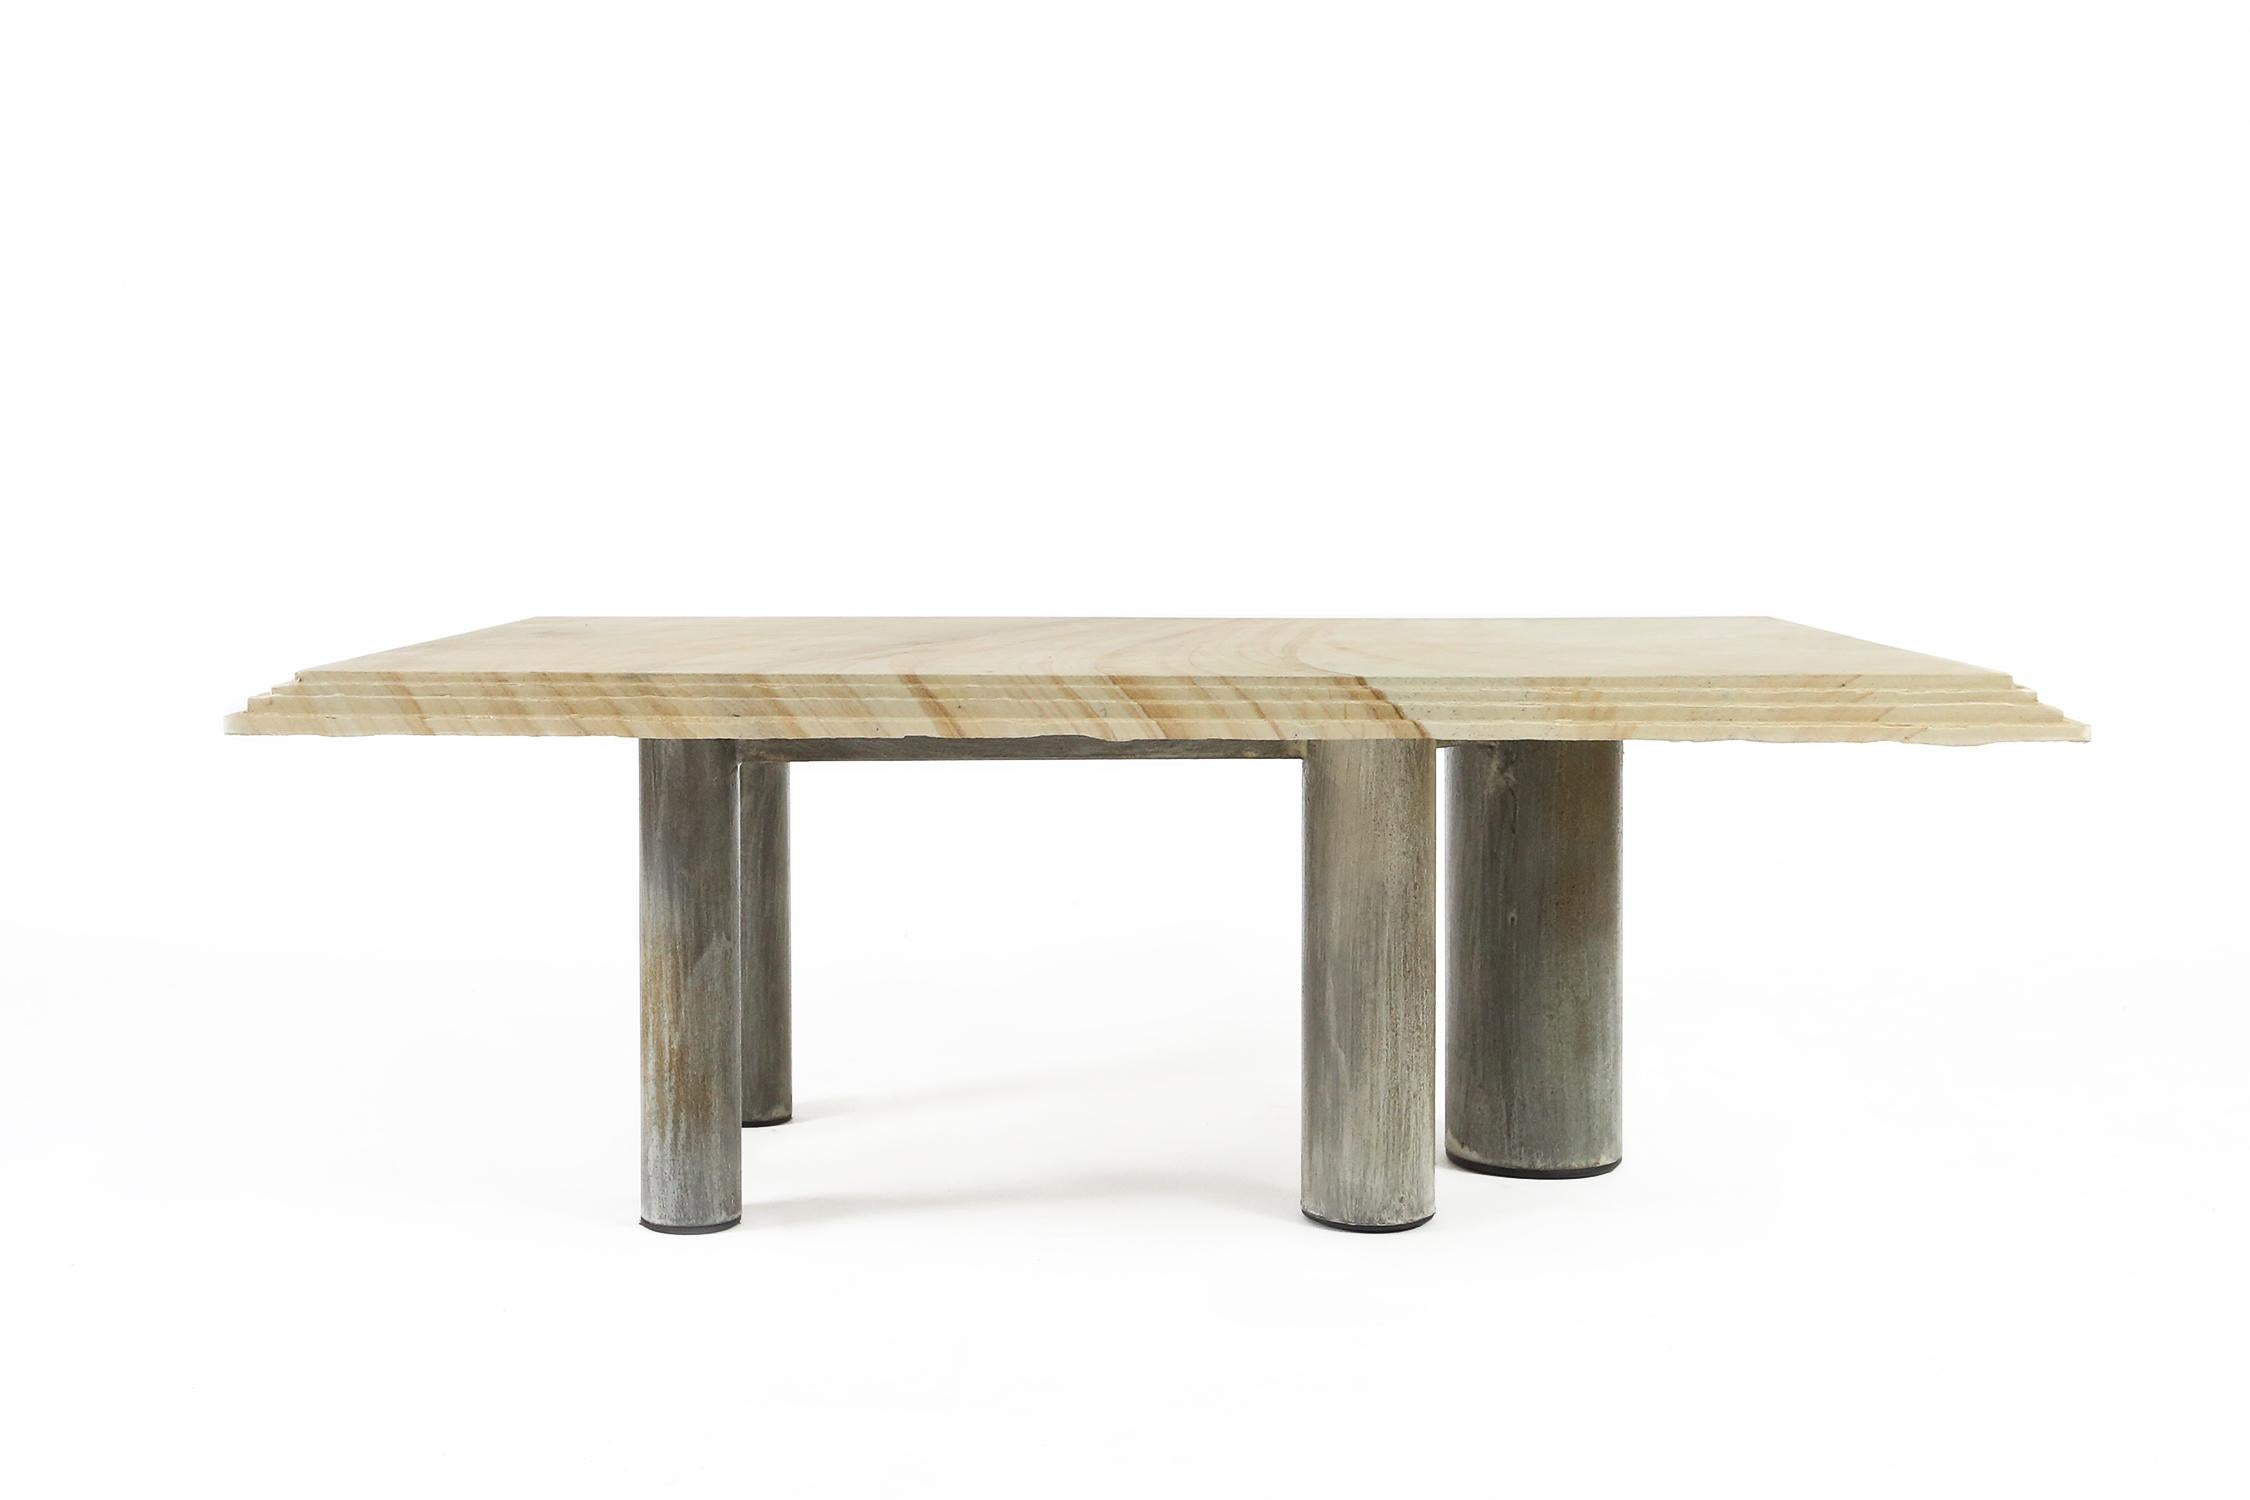 Beautifull Brutalist coffee table designed and made by the legendary Belgian design company Pia Manu.
Pia Manu is a workshop from Ingelmunster, Belgium where Jules Dewaele, and later his son Koen Dewaele worked during the 1960s until now, working